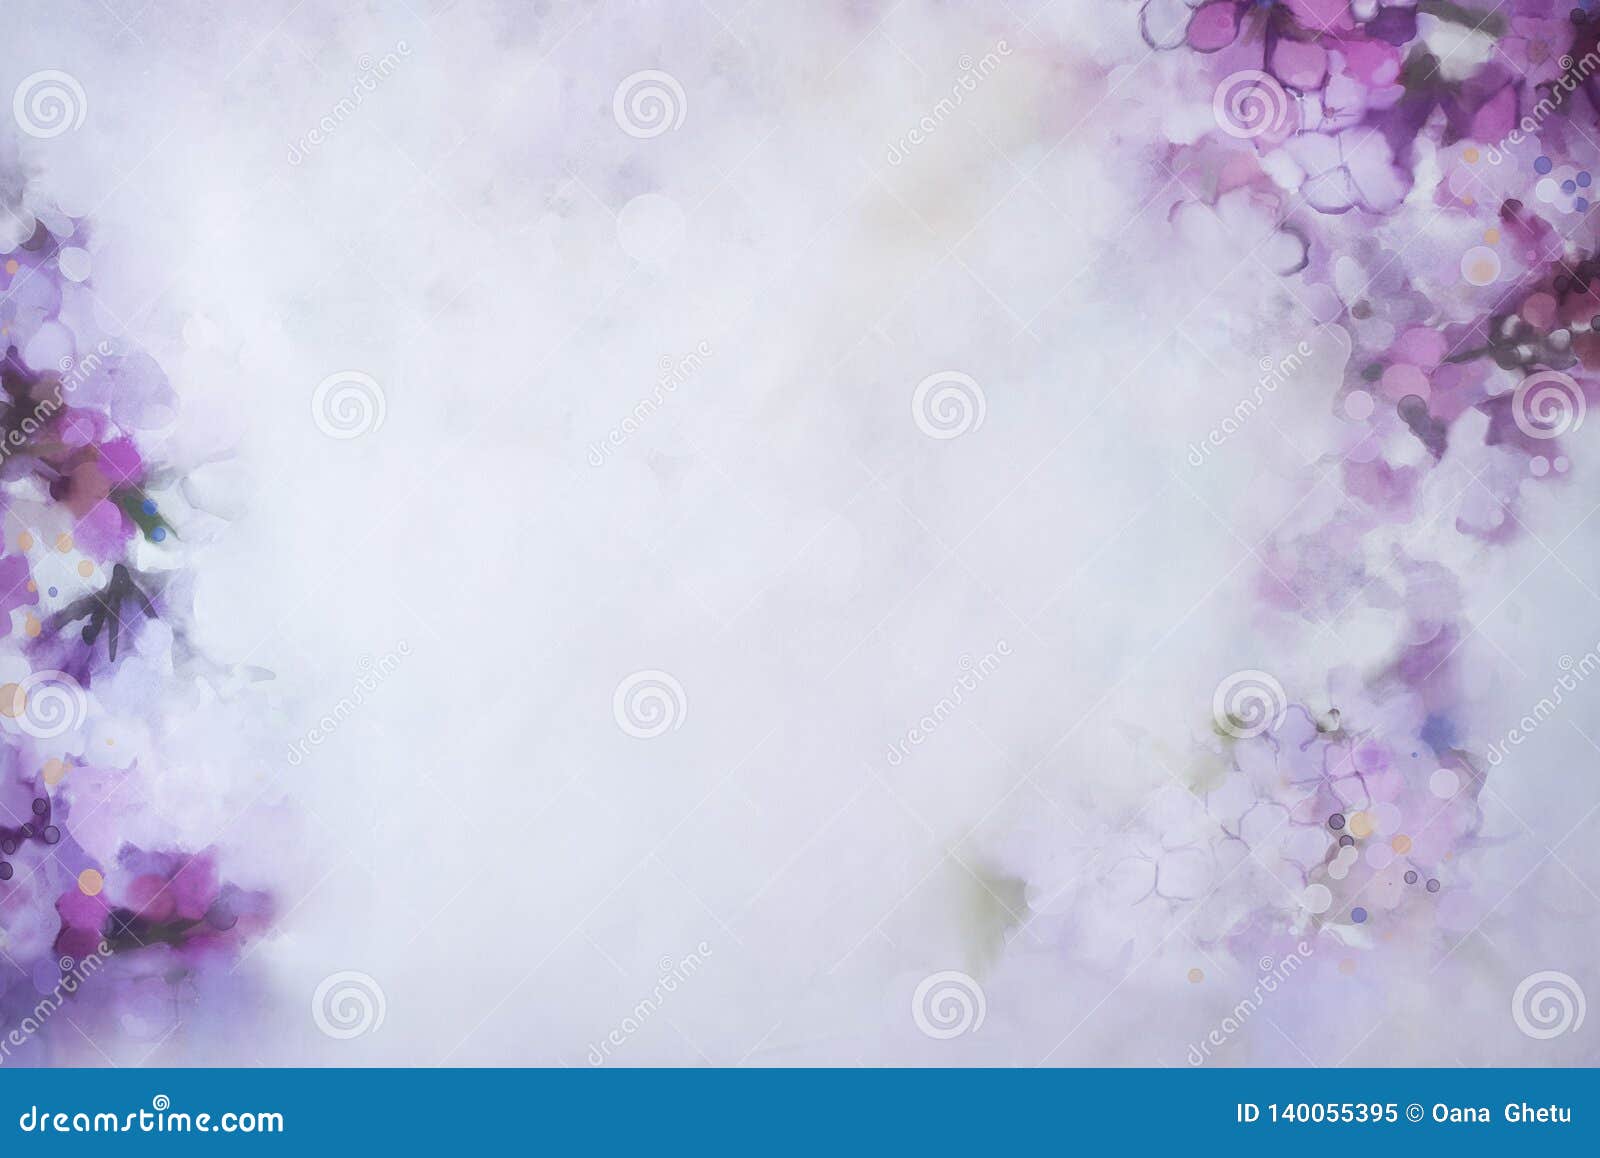 Spring Photo Background with Flowers Stock Image - Image of beautiful,  abstract: 140055395